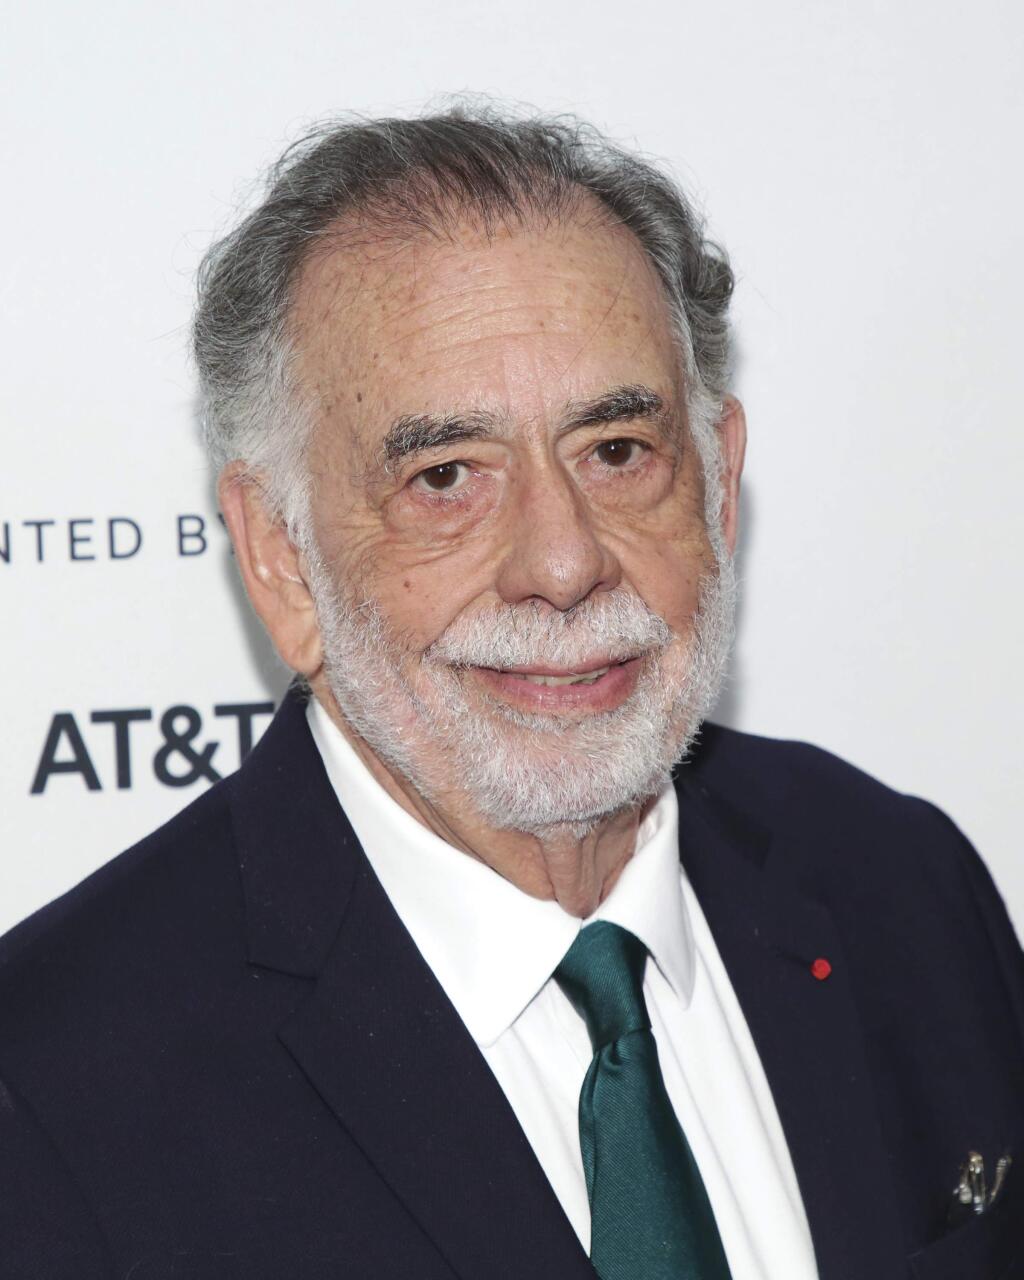 FILE - In this Sunday, April 28, 2019, file photo, director Francis Ford Coppola attends a screening of the '40th Anniversary and World Premiere of Apocalypse Now Final Cut' during the 2019 Tribeca Film Festival at the Beacon Theatre, in New York. The film releases in theaters on Aug. 15. (Photo by Brent N. Clarke/Invision/AP)